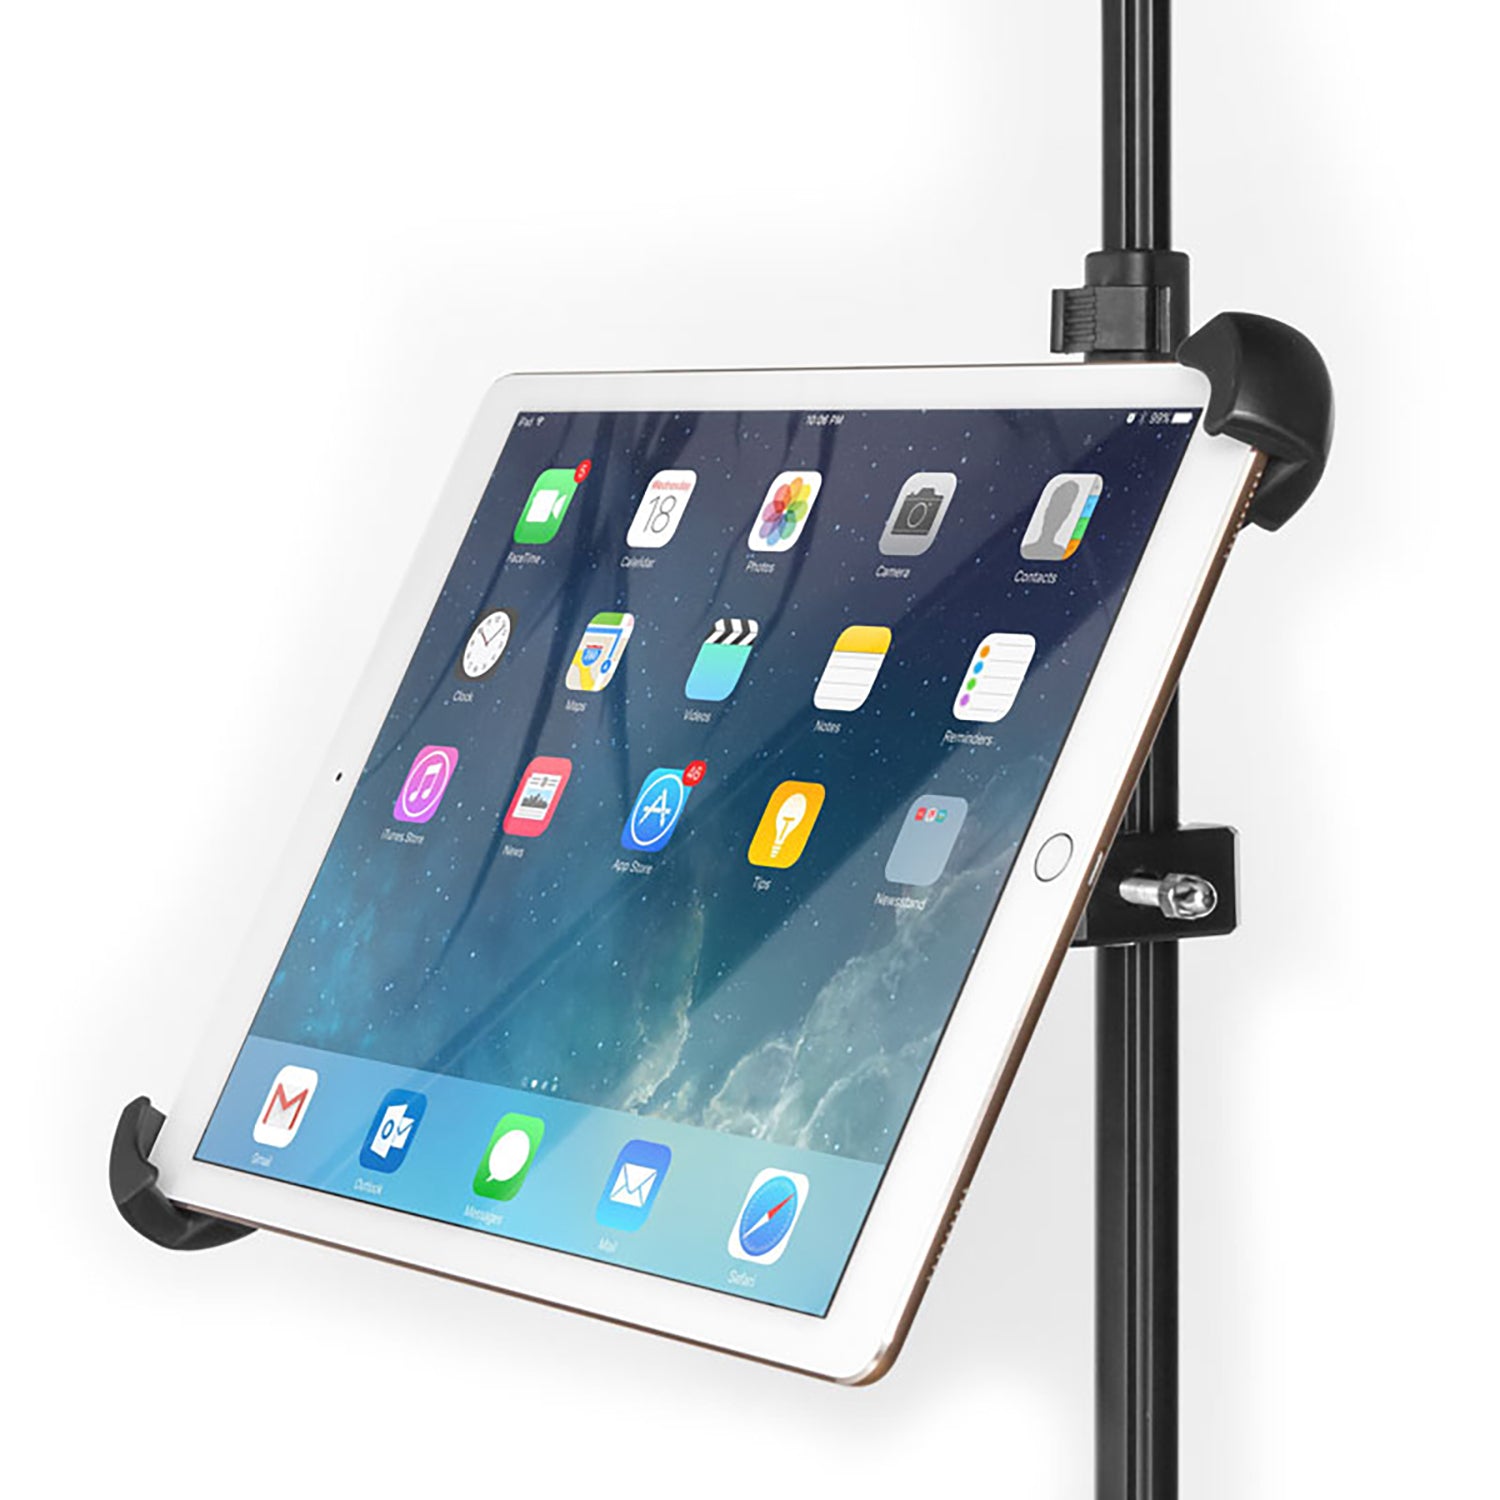 Grifiti Nootle Heavy Duty Bar Metal Clamp + Universal Large Tablet and iPad Mount - Grifiti